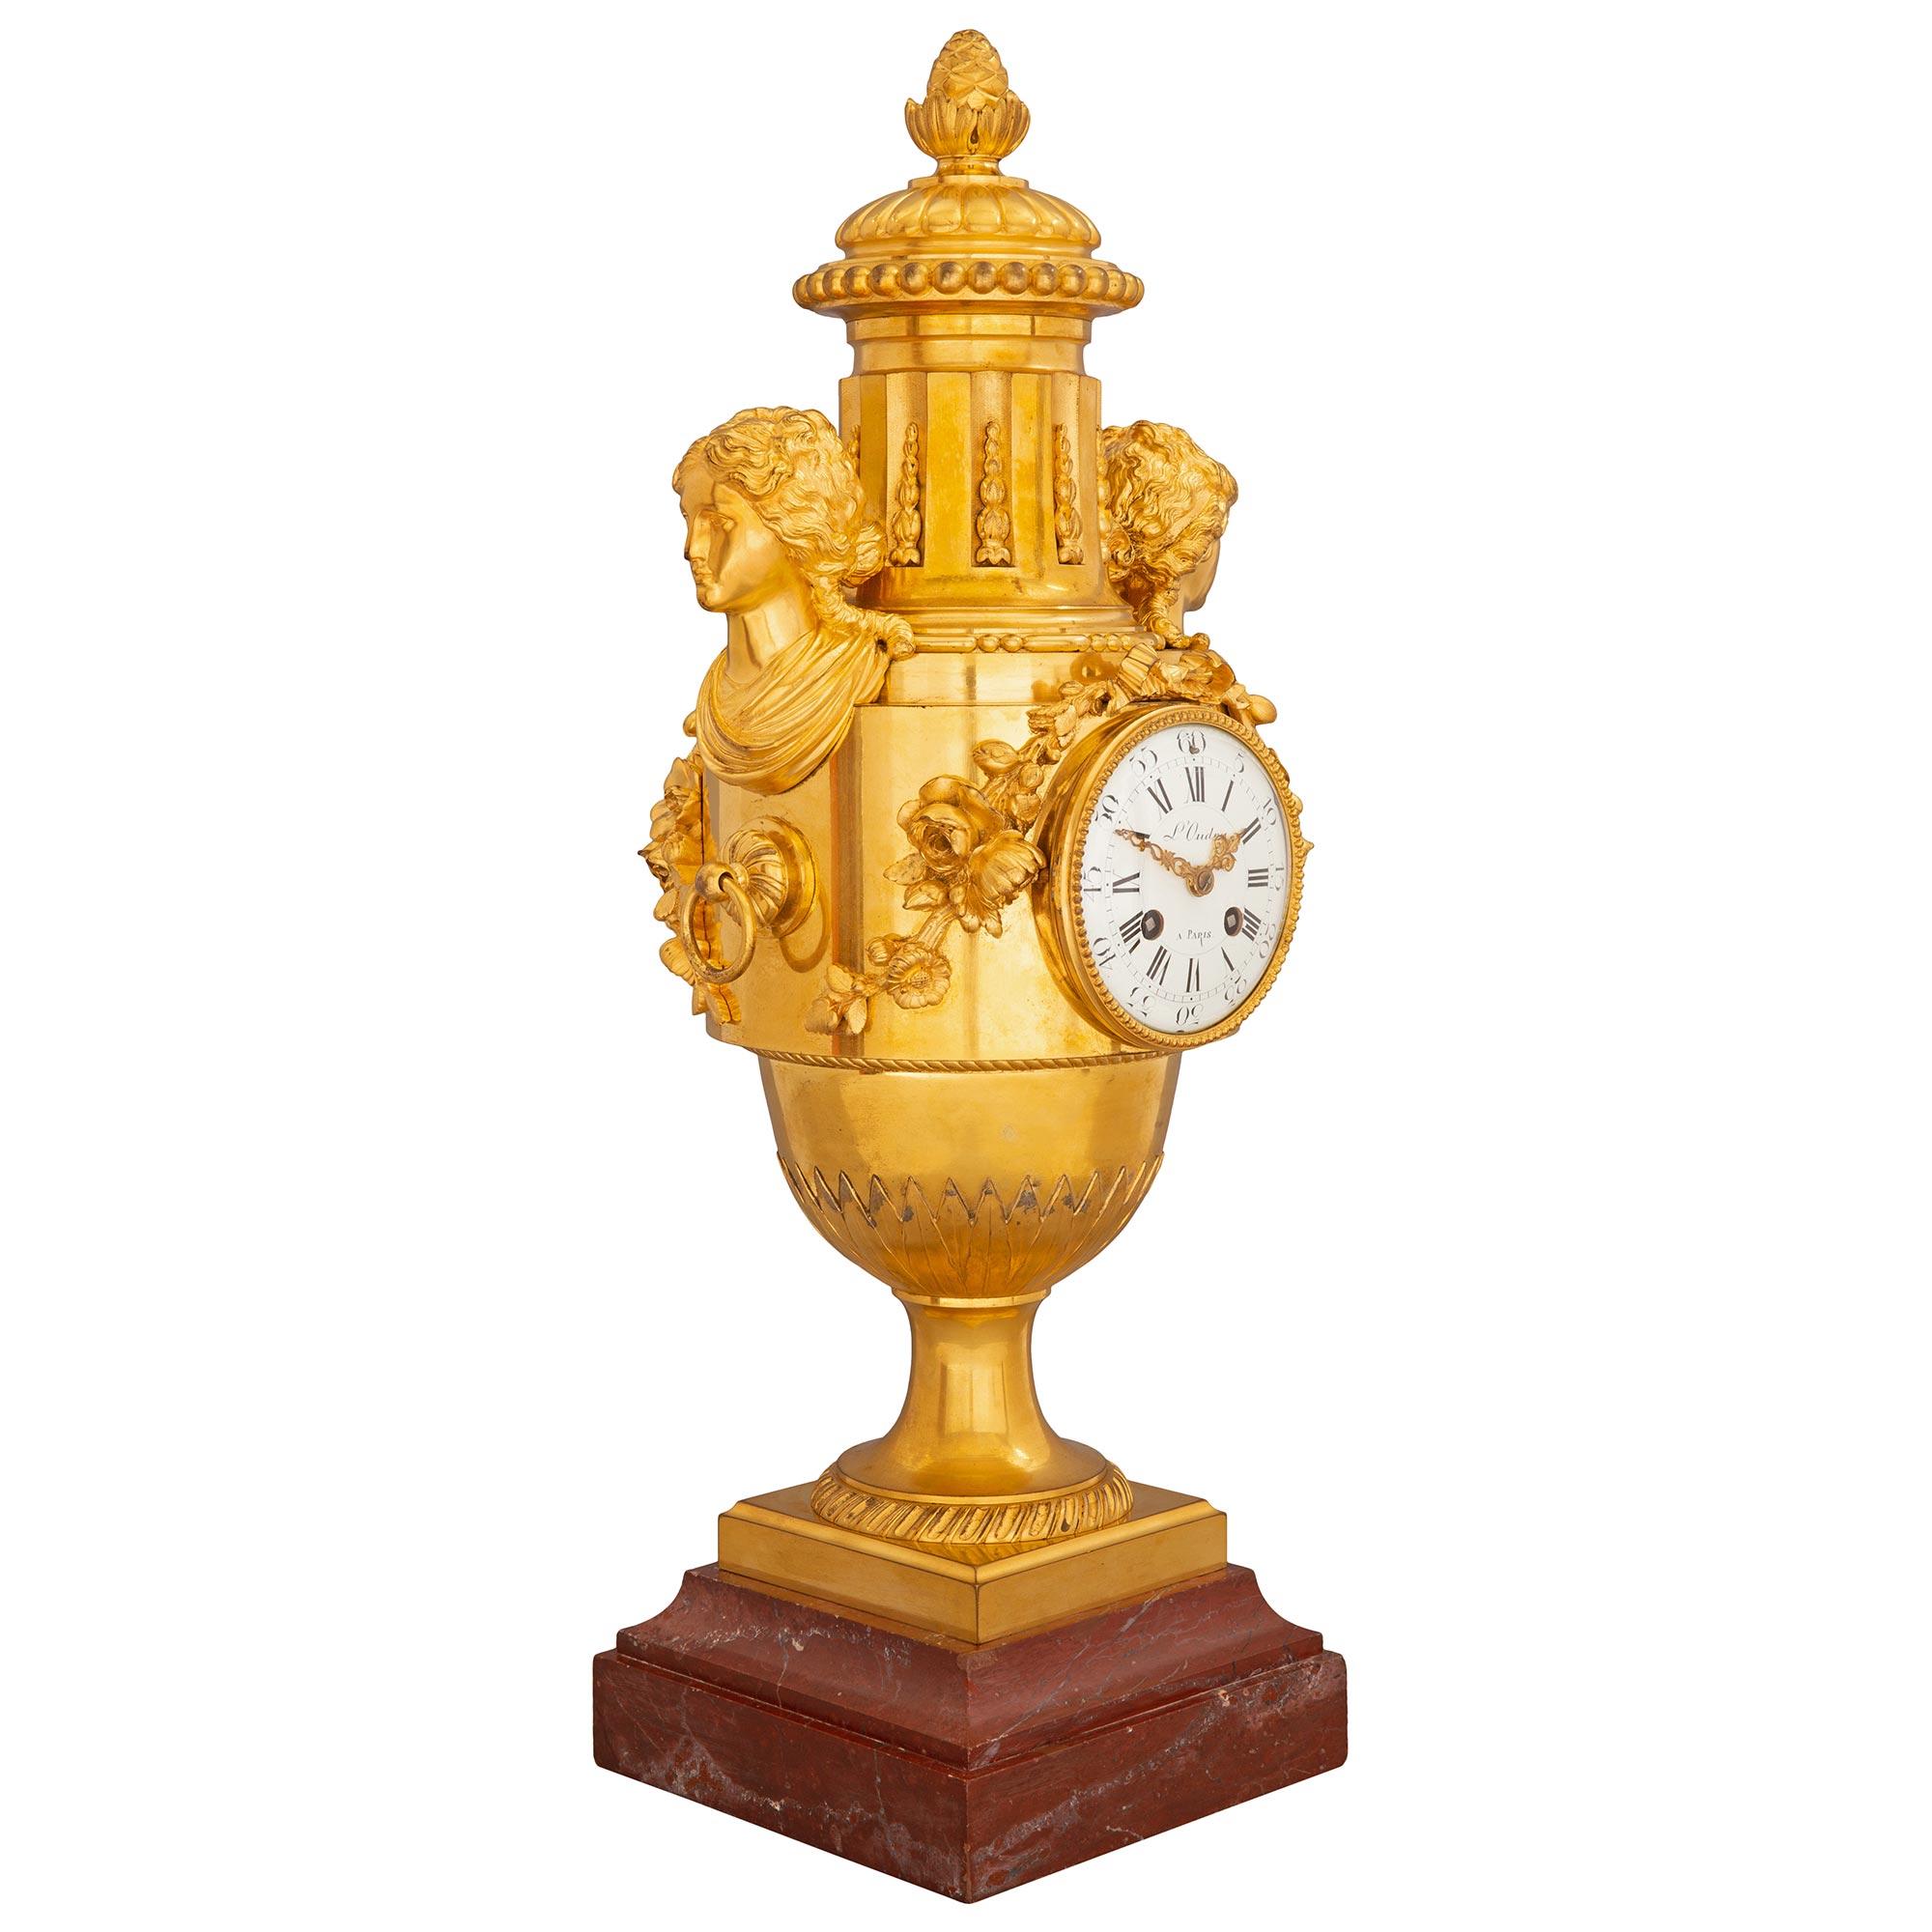 A stunning and very high quality French mid-19th century Louis XVI st. ormolu and Rouge Griotte marble clock, stamped L. Oudry, Paris. The clock is raised by a thick square Rouge Griotte marble base below the ormolu socle shaped pedestal with a